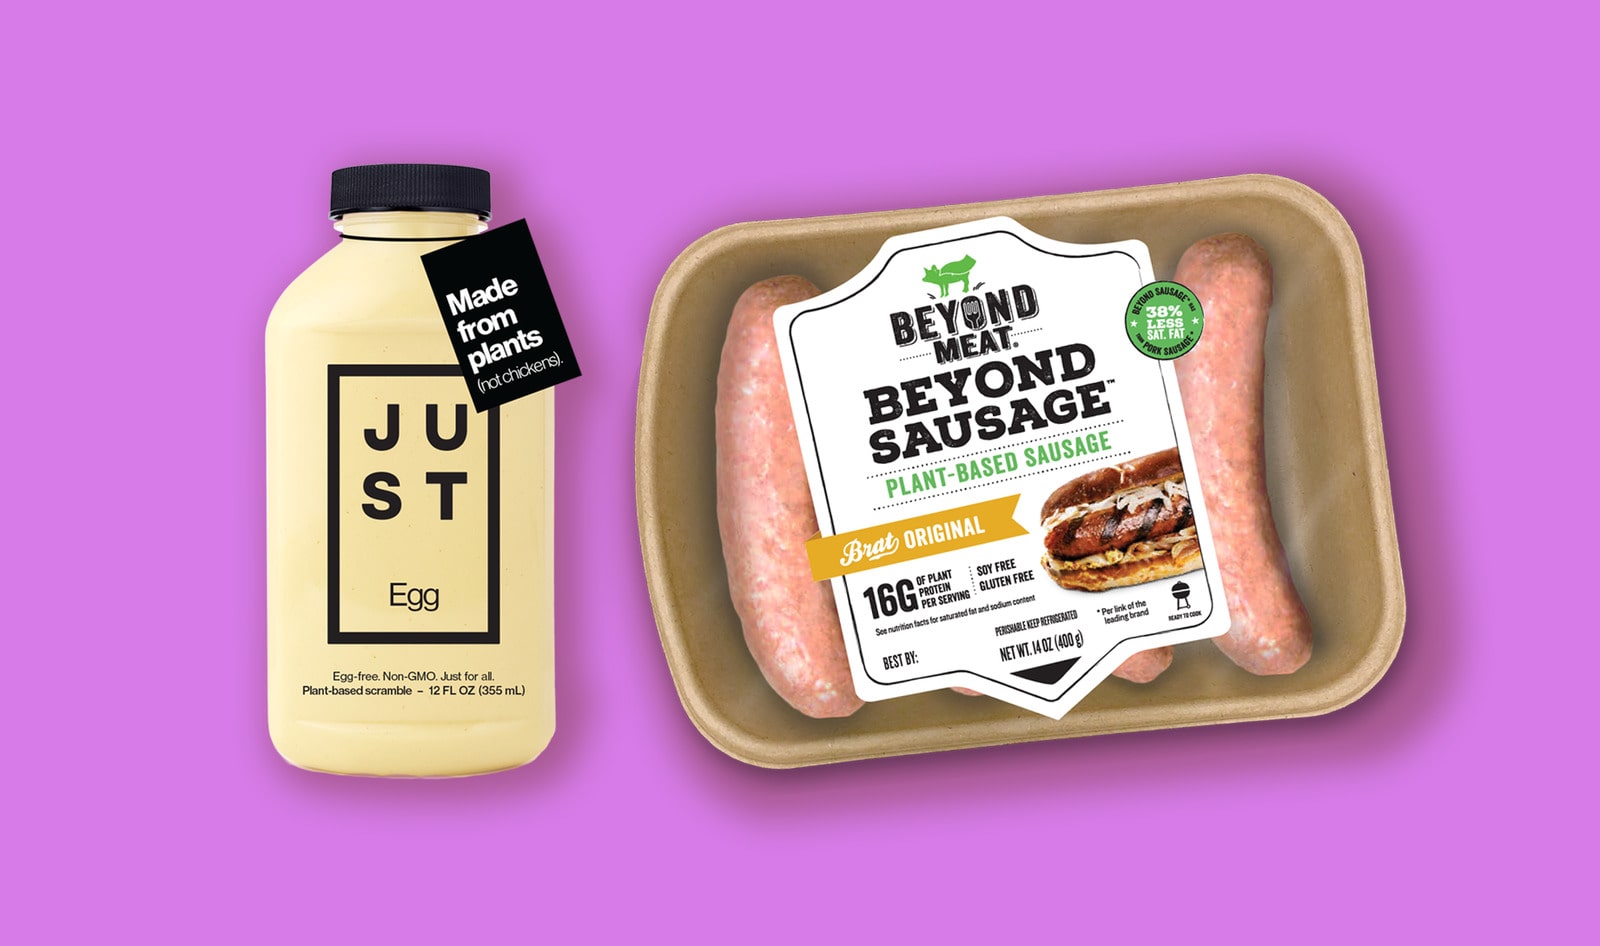 Beyond Sausage and JUST Egg Debut in South Africa Next Year